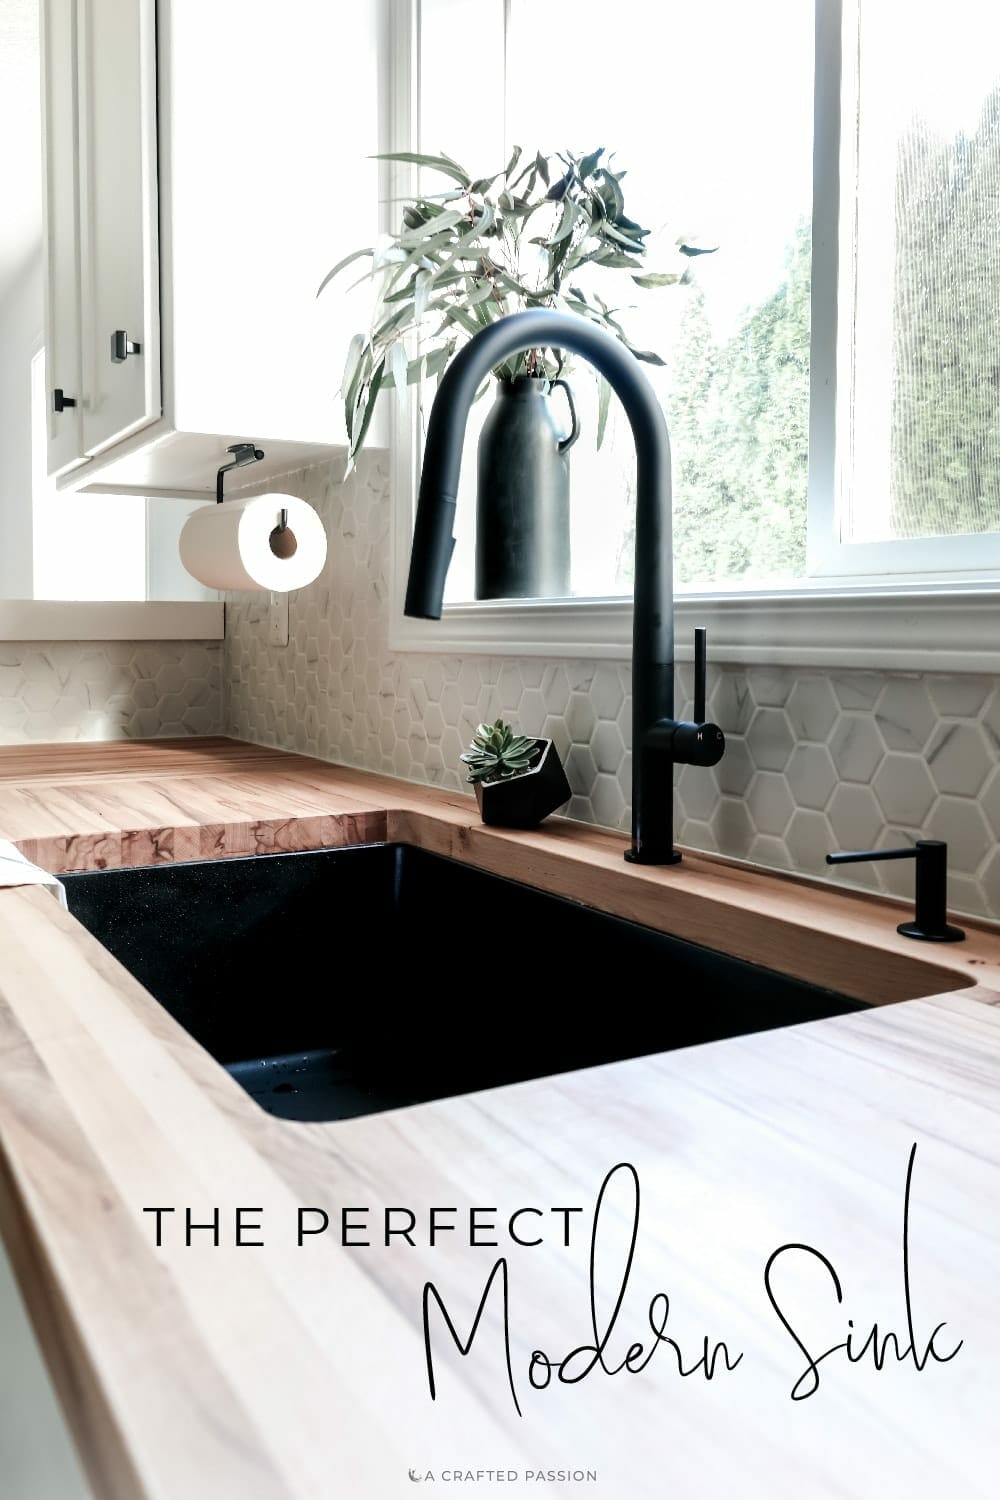 Looking for a new sink? With clean lines, a black finish, and easy to clean surface, this is the perfect modern kitchen sink! Sponsored by Elkay #modernkitchen #kitchensink